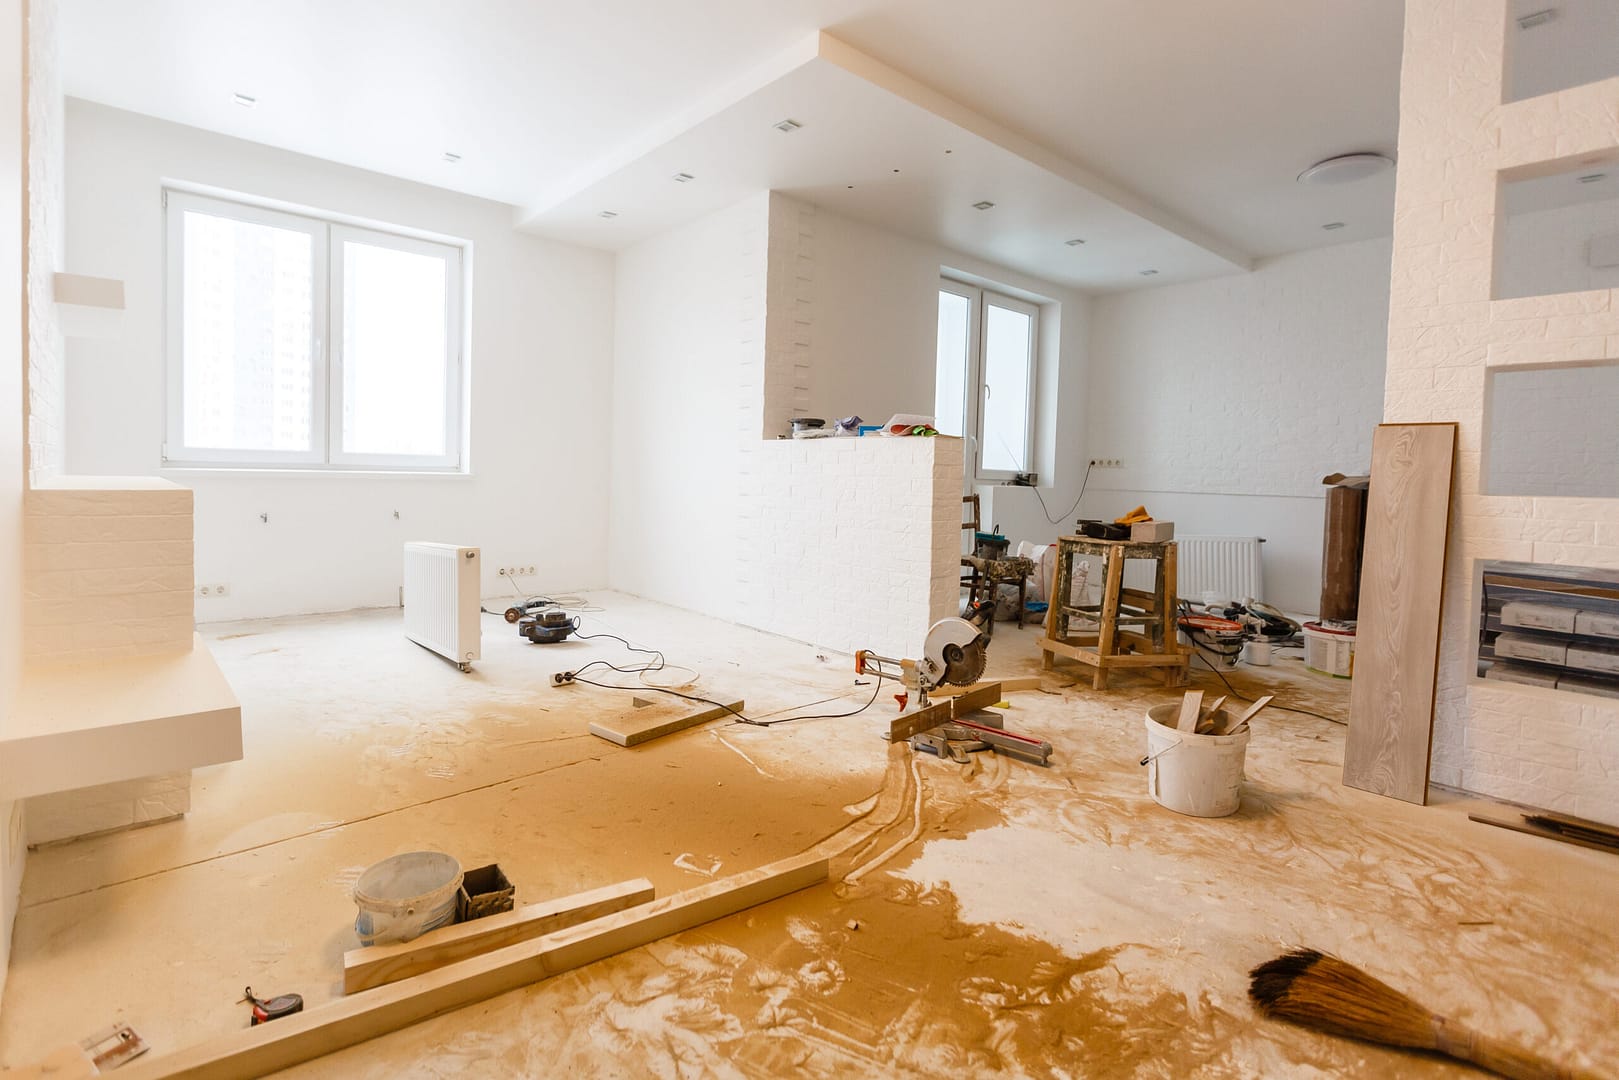 Active home remodel scene emphasizing the importance of marketing for home remodeling businesses.